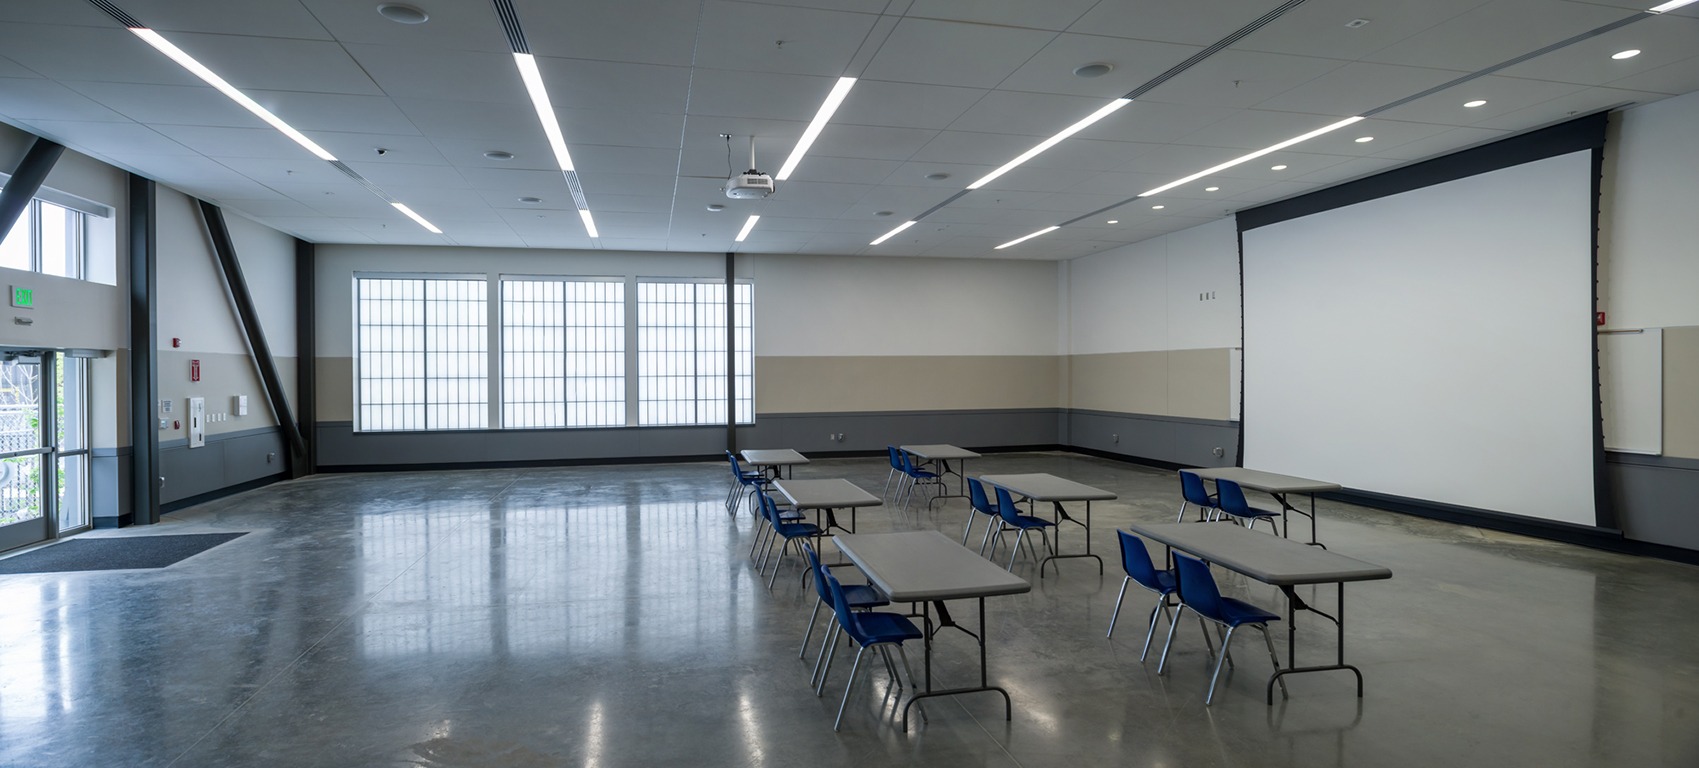 Large training room with concrete floors and oversized windows.